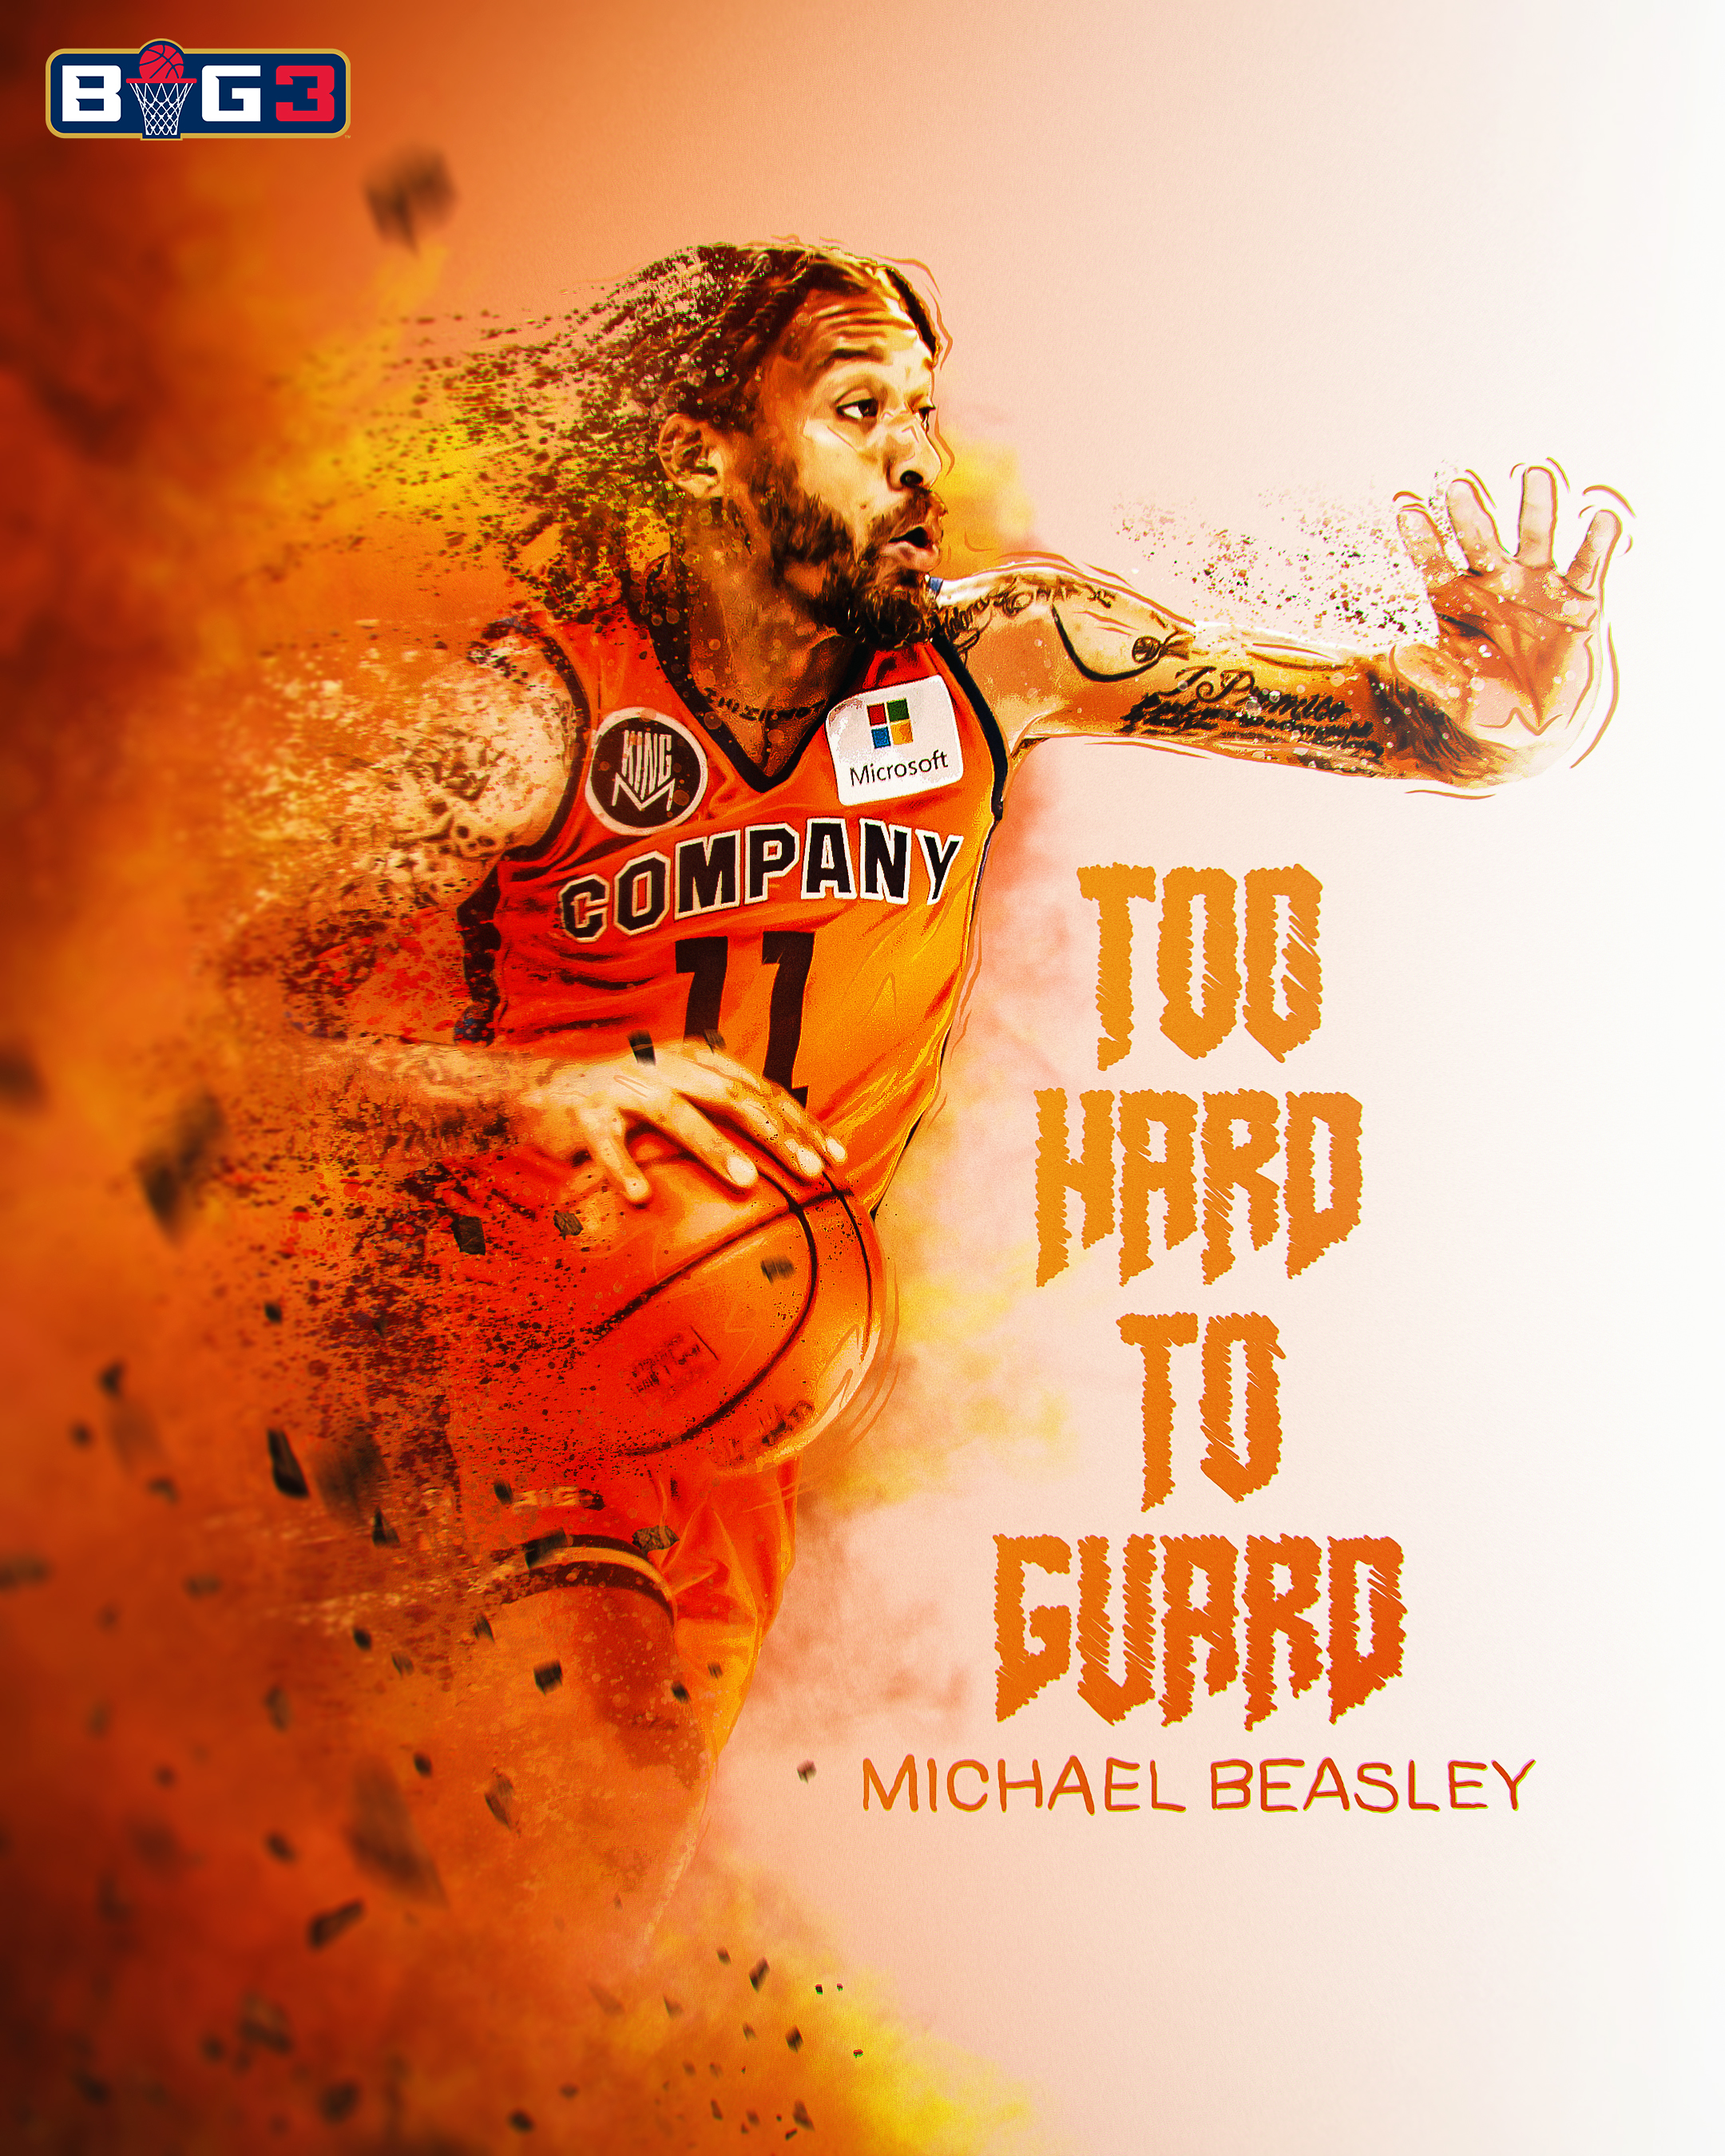 Ex-New York Knick Michael Beasley is Returning to Pro Basketball